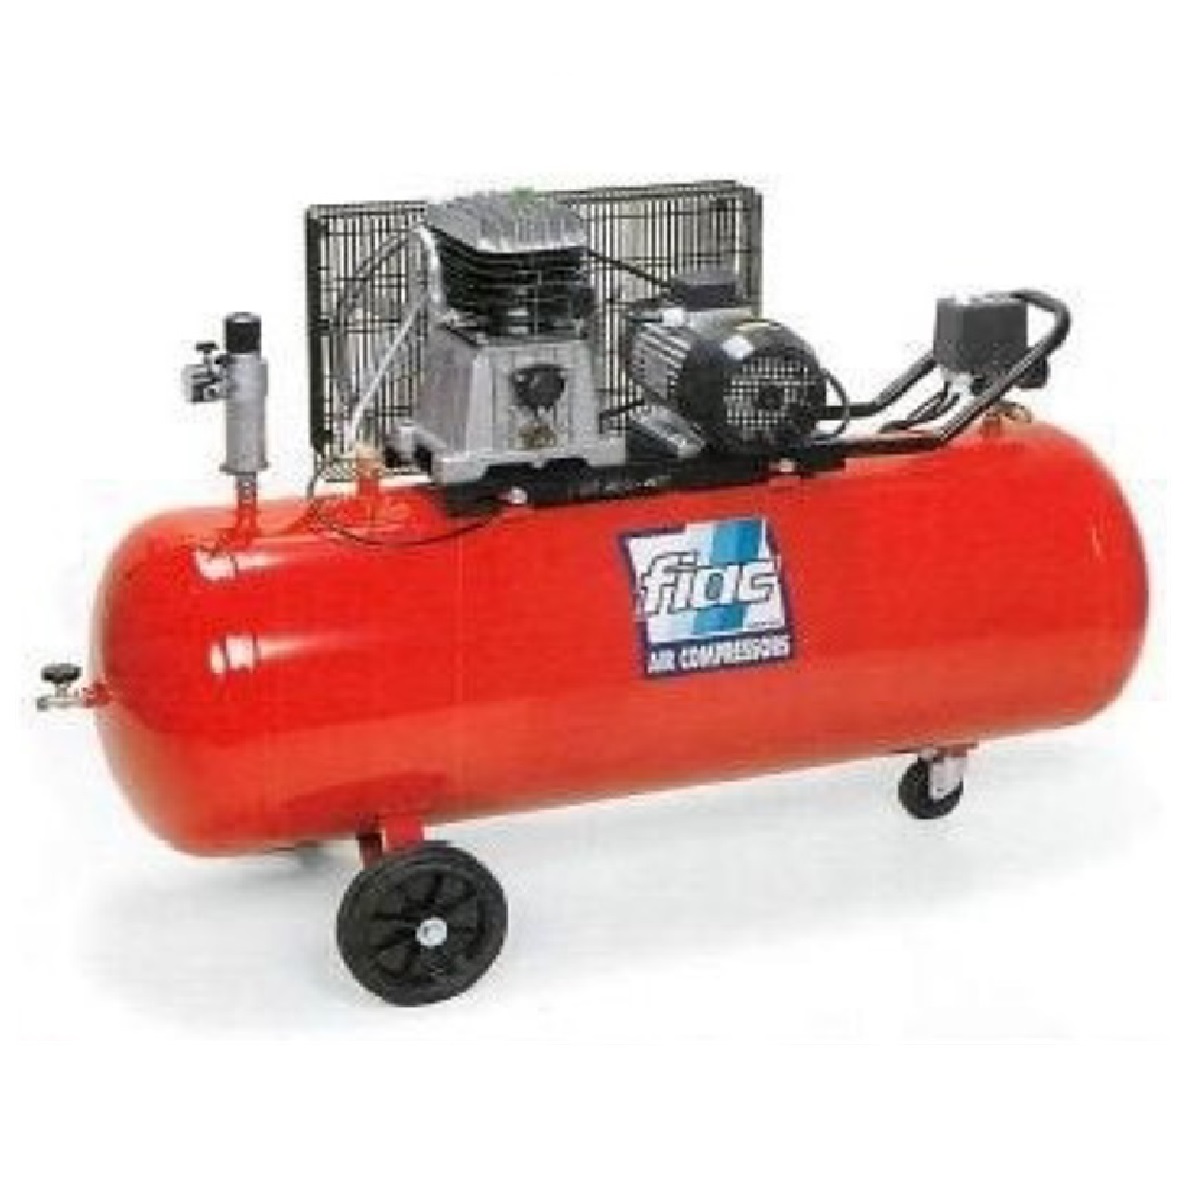 Centimeter beven Great Barrier Reef Fiac Air Compressor 2.0HP 50L (Made In Italy)